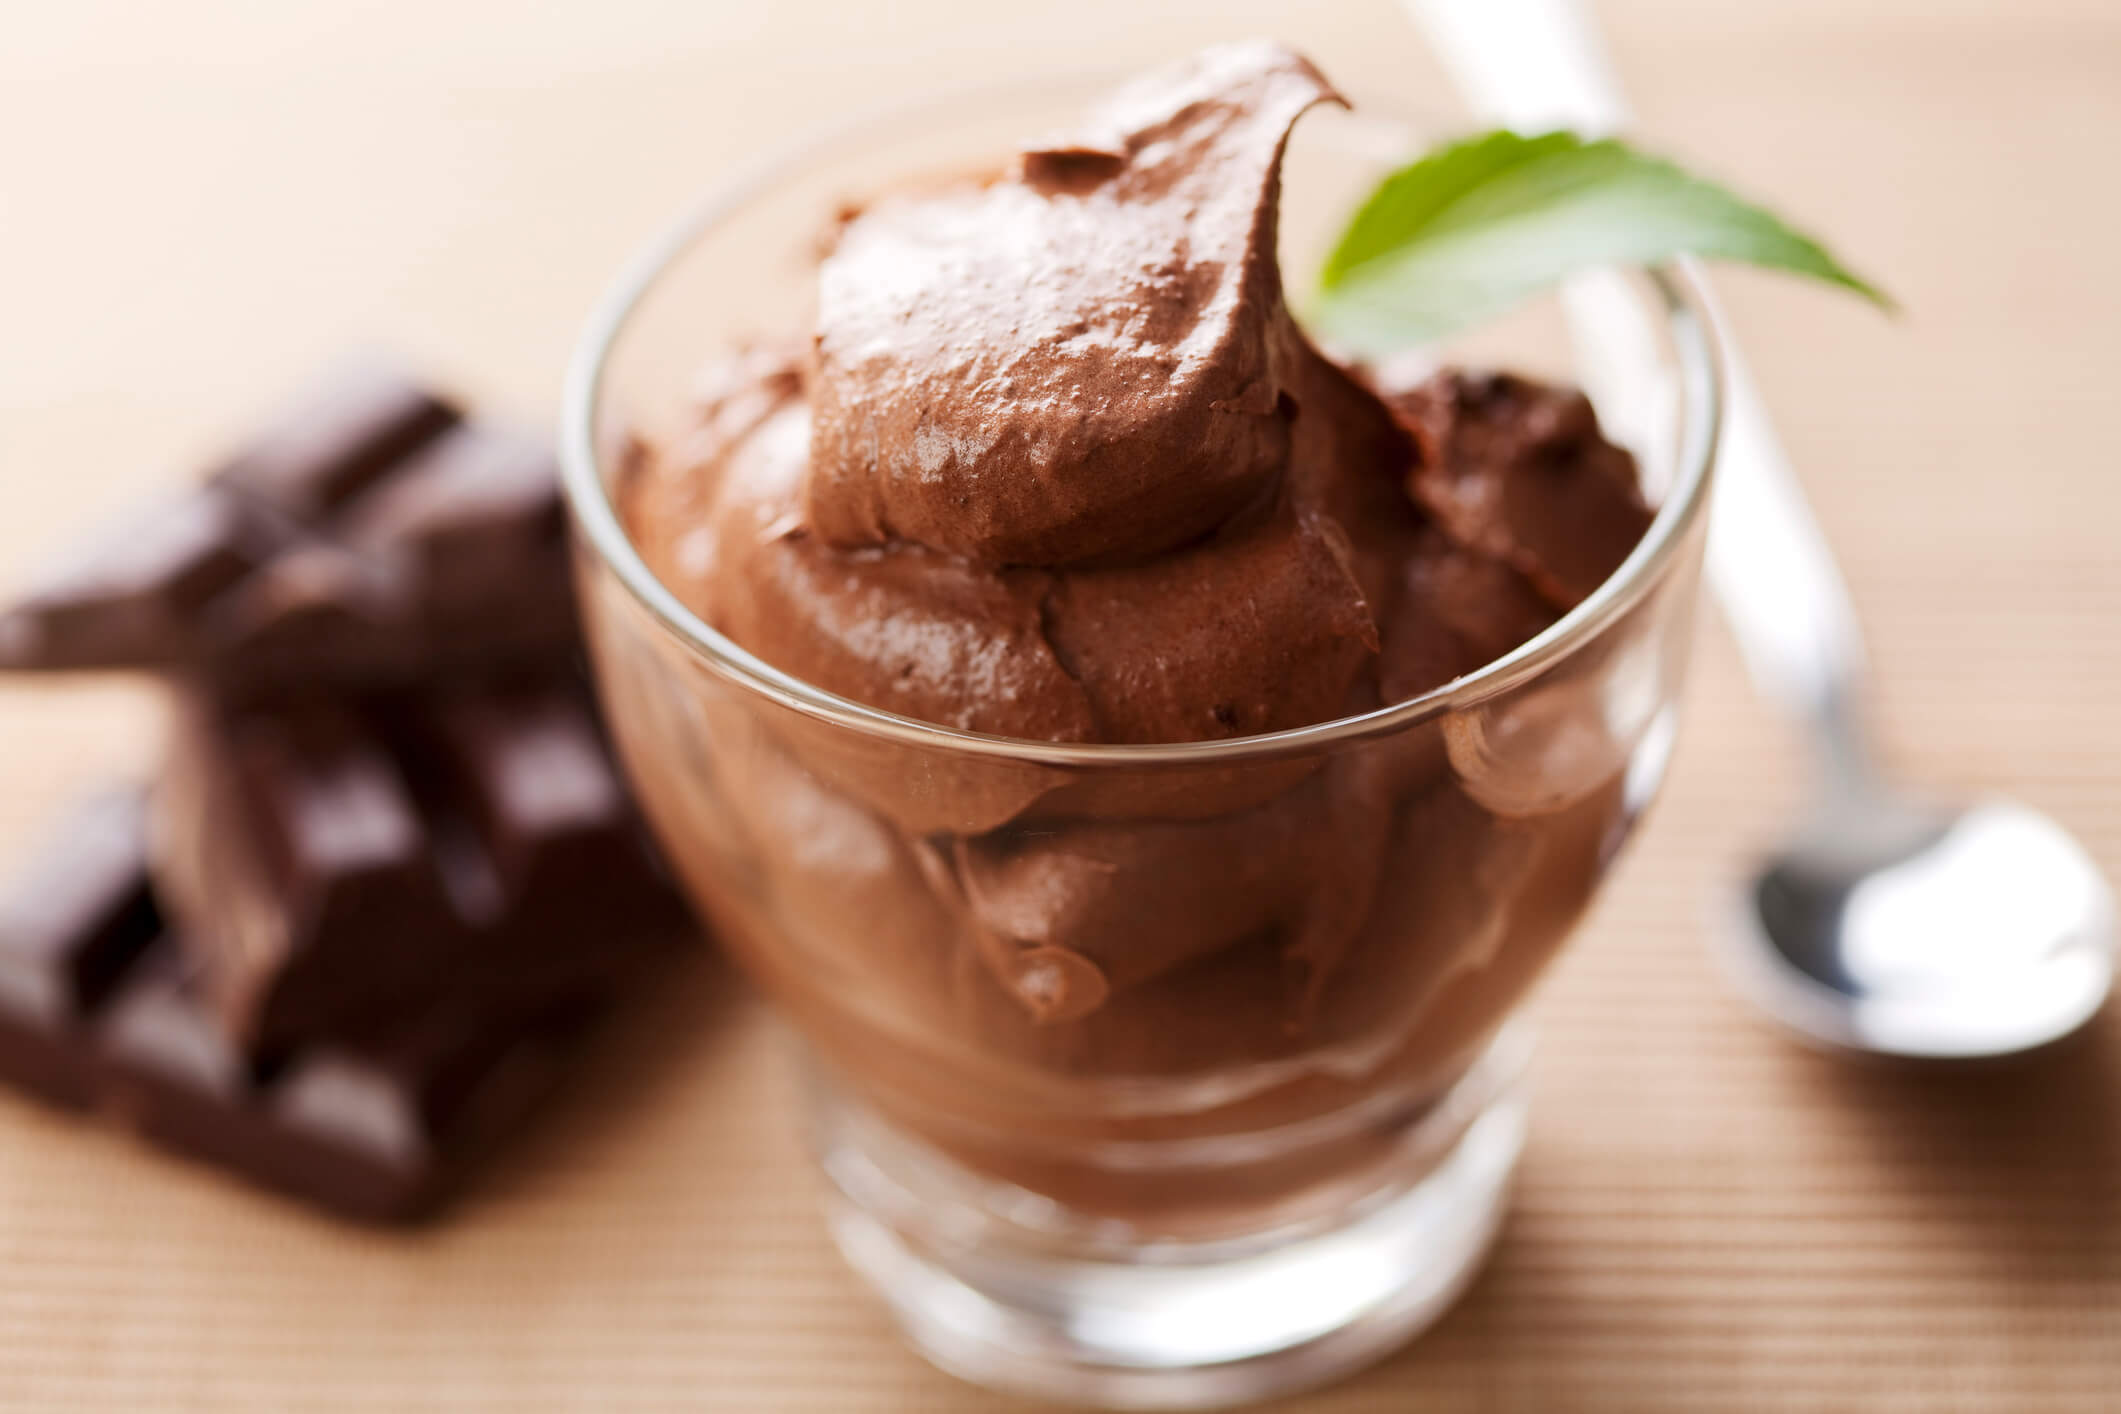 This gluten-free and vegan chocolate pudding is not only healthy but great for playing it safe.